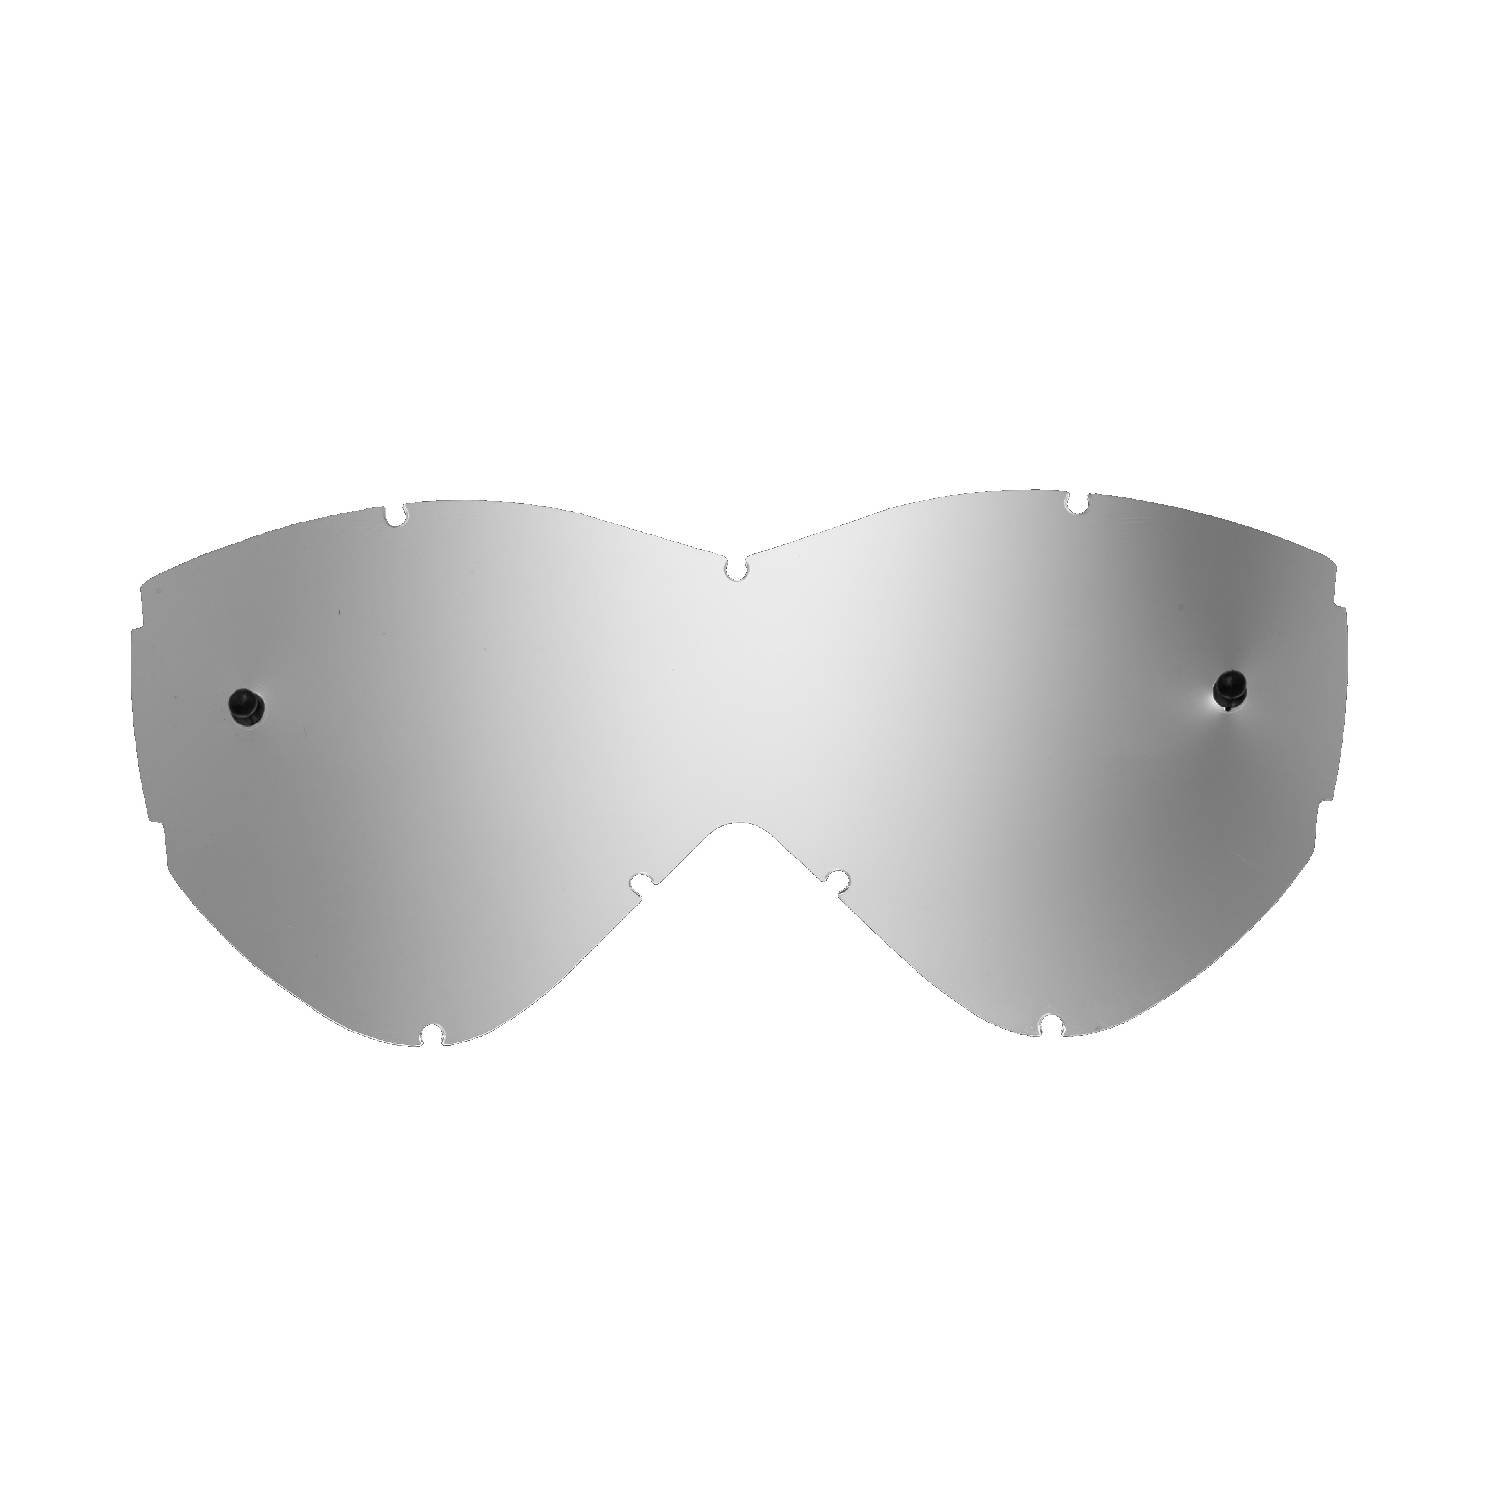 silver-toned mirrored replacement lenses for goggles compatible for Smith Warp goggle